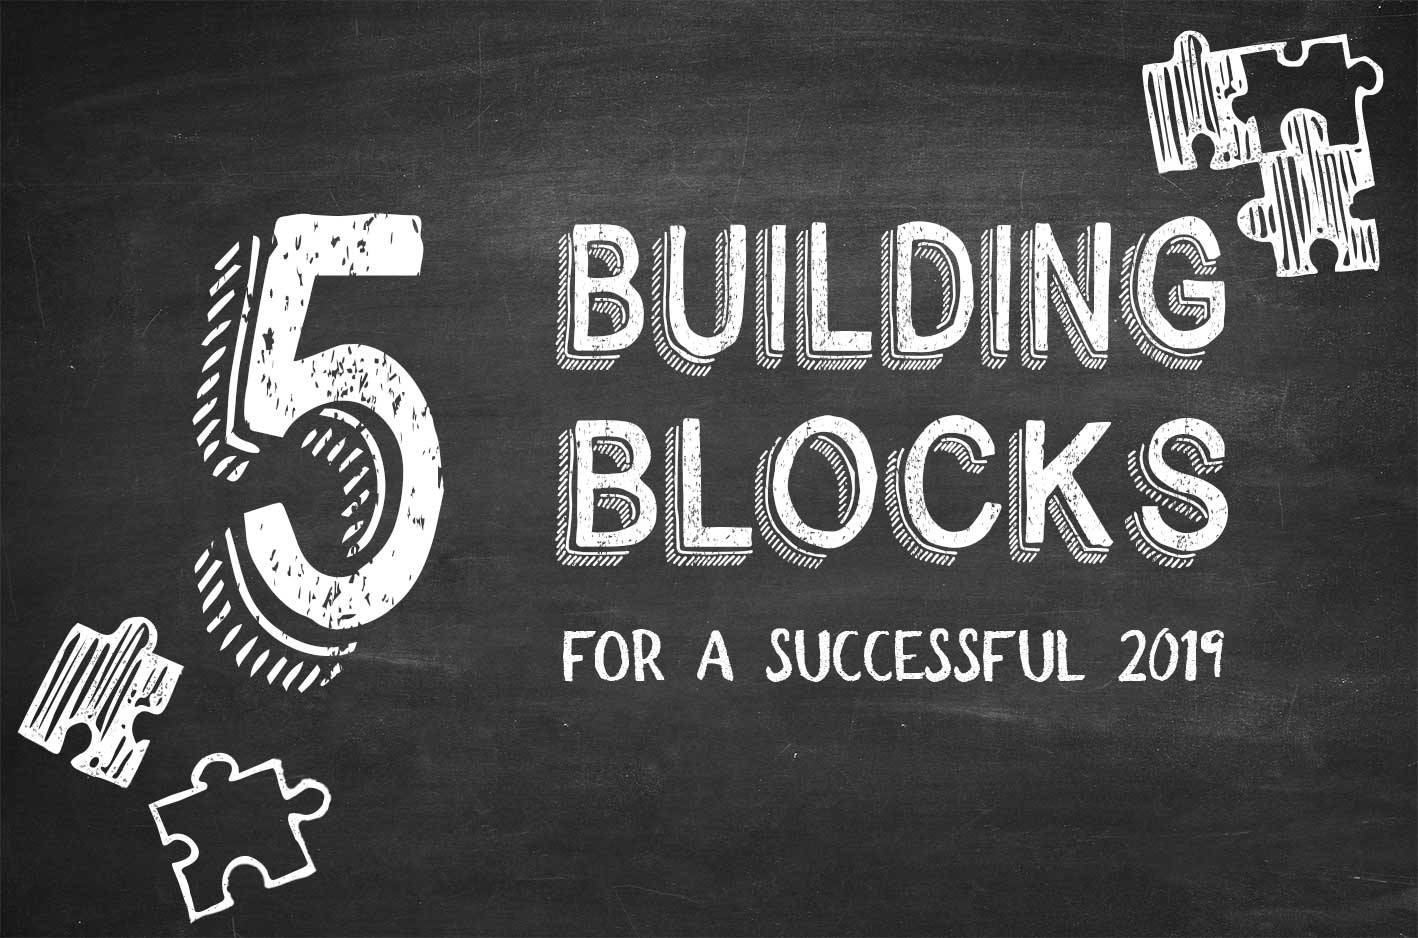 The 5 building blocks for a successful 2019